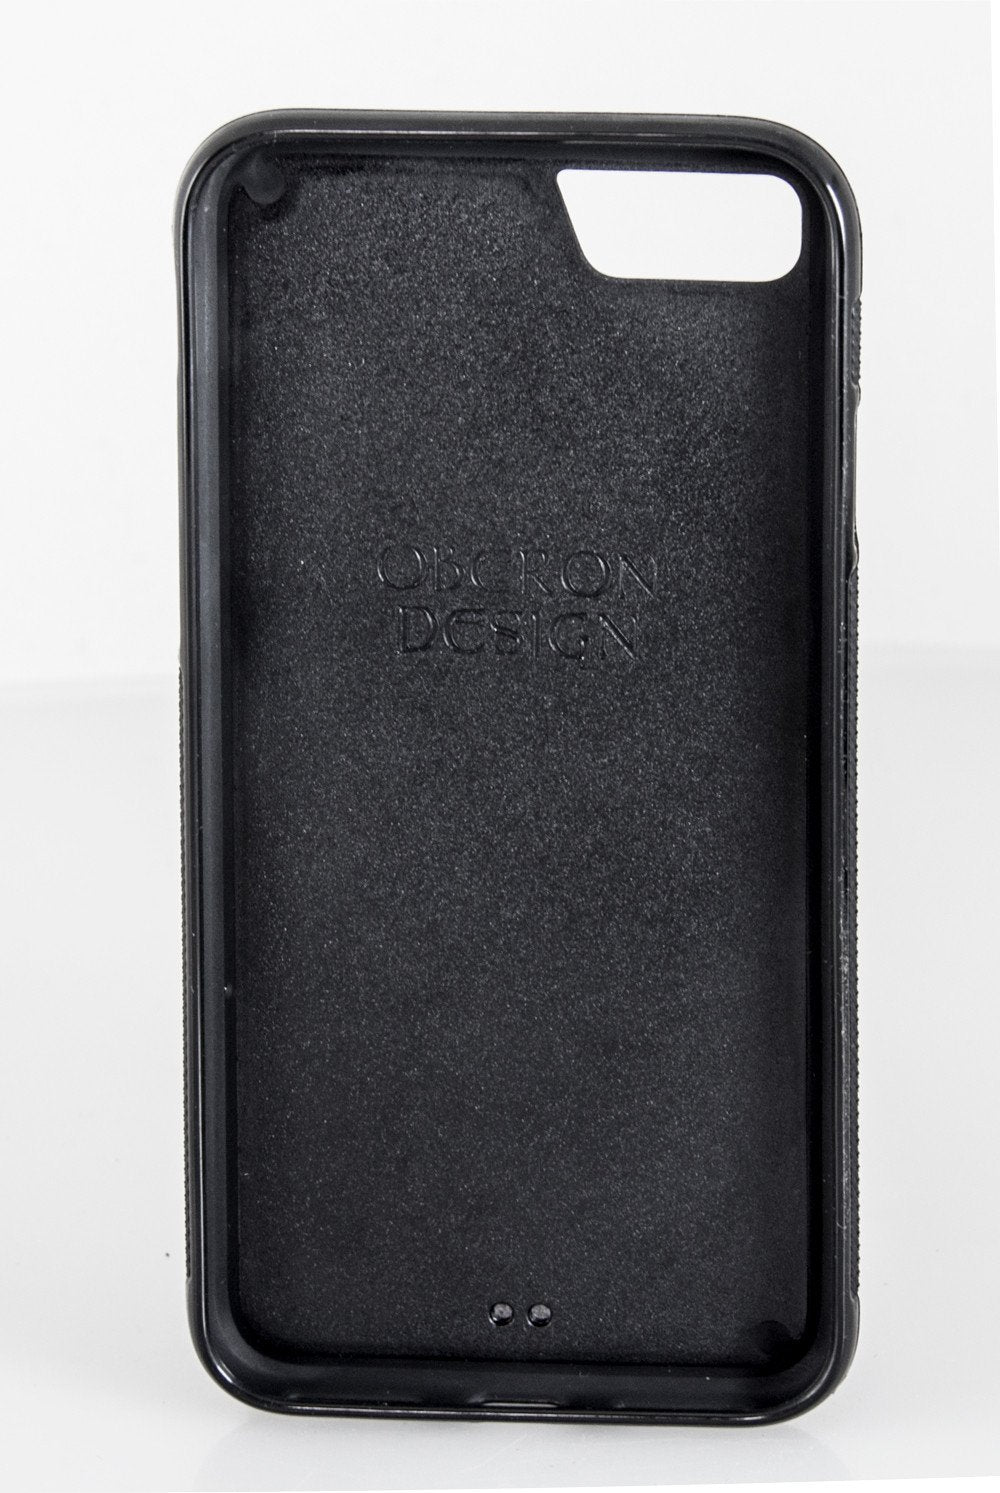 Leather Wallet Case Insert for iPhone